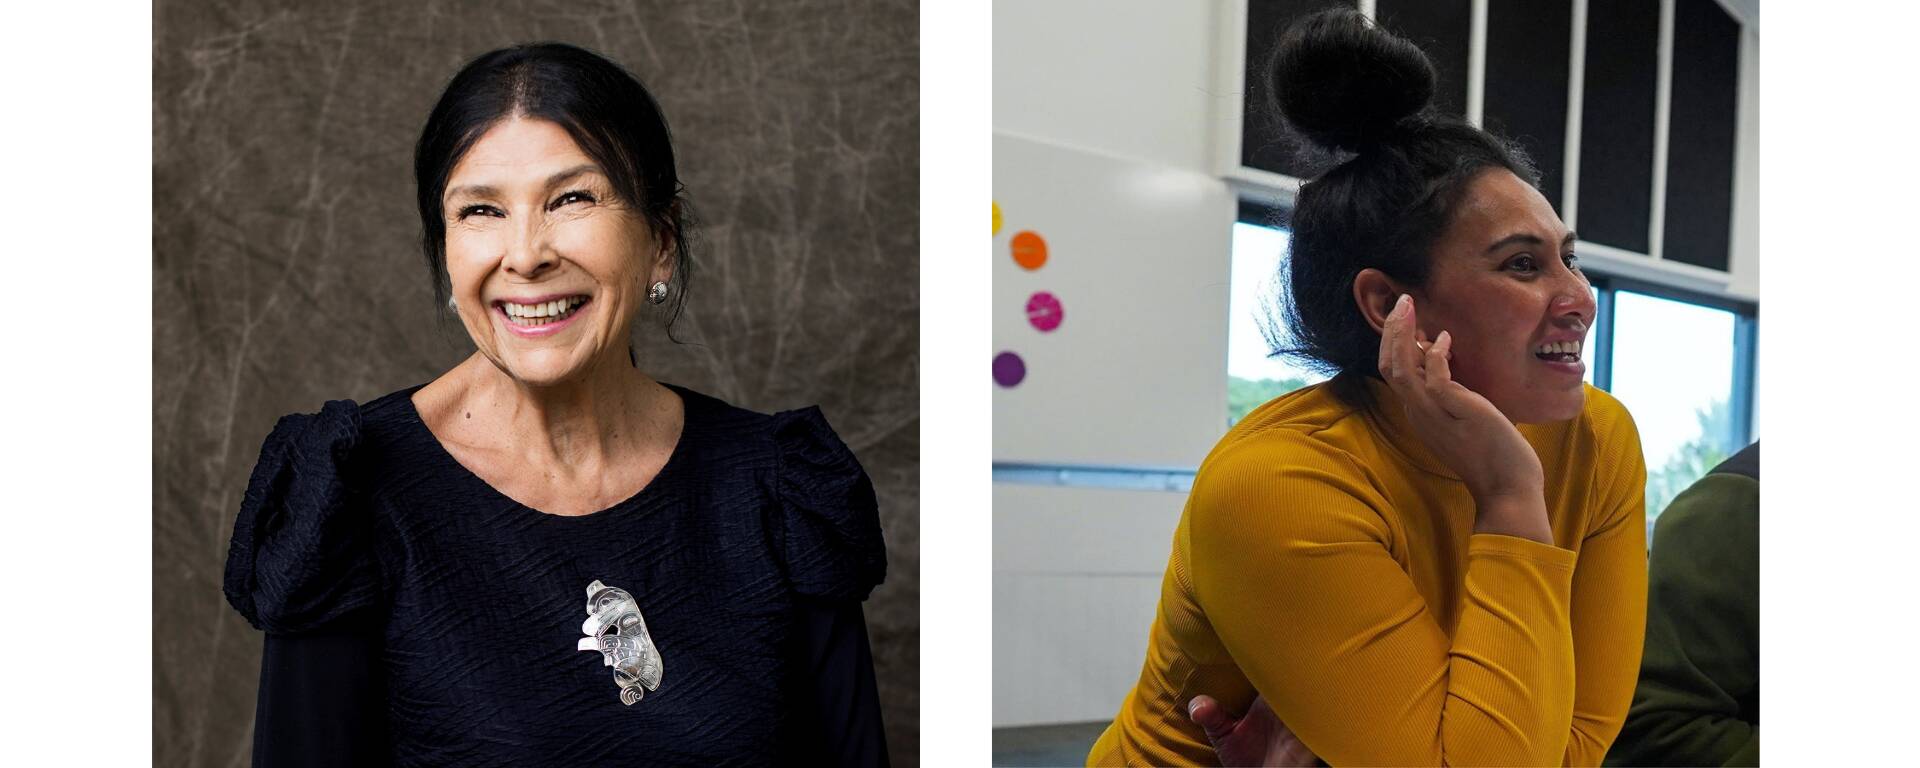 To move between: Healing and Resistance | Alanis Obomsawin in conversation with Edith Amituanai